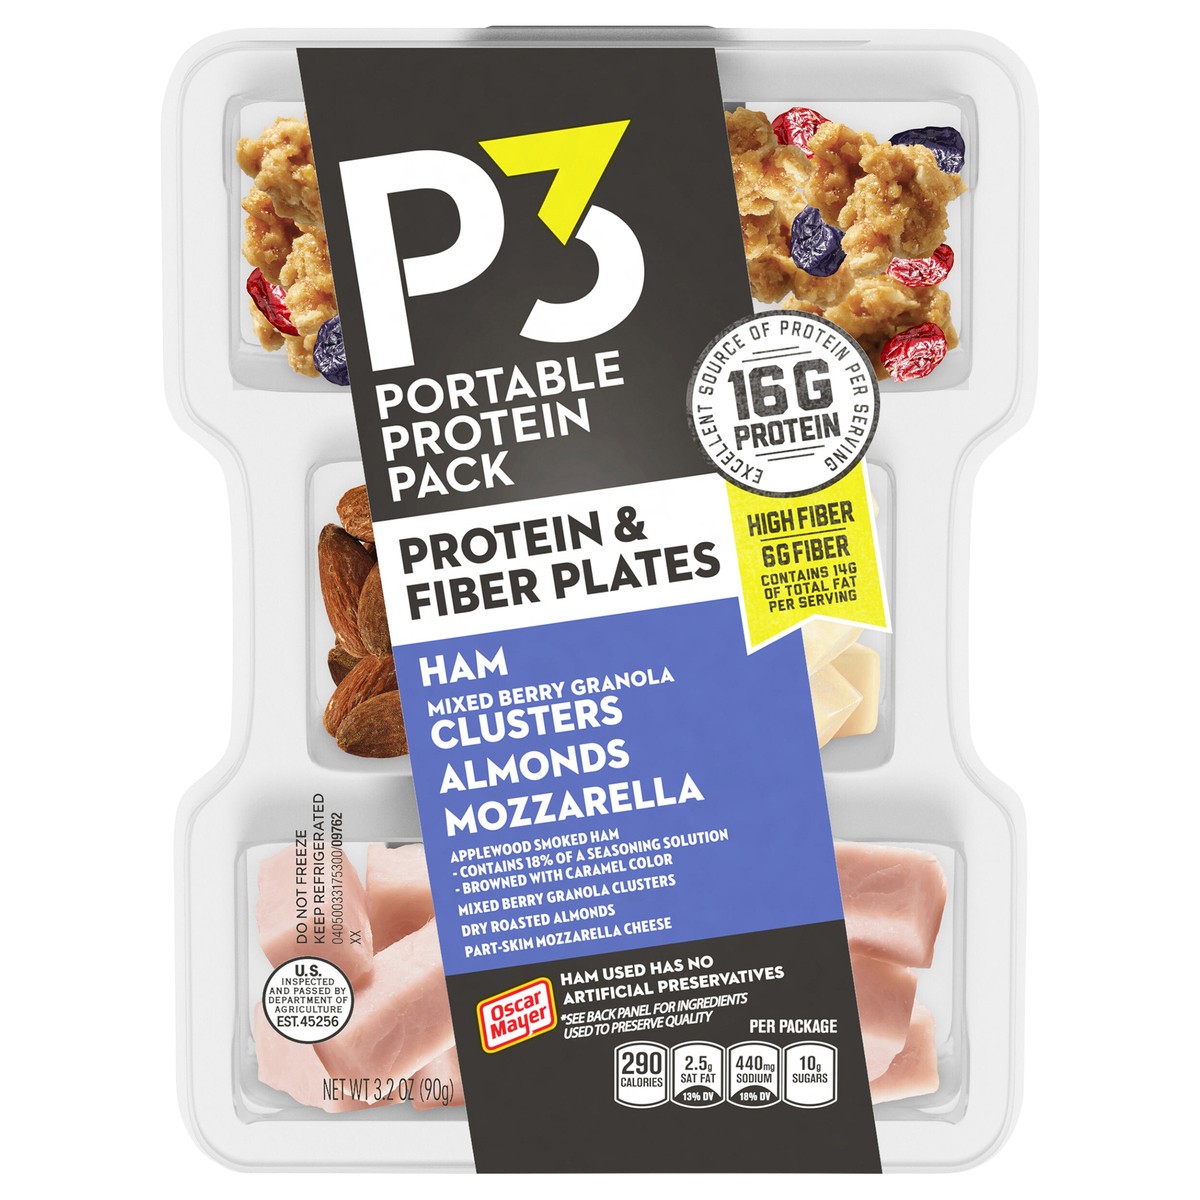 slide 1 of 13, P3 Portable Protein Snack Pack & Fiber Plate with Ham, Mixed Berry Granola Clusters, Almonds & Mozzarella Cheese, 3.2 oz Tray, 3.2 oz